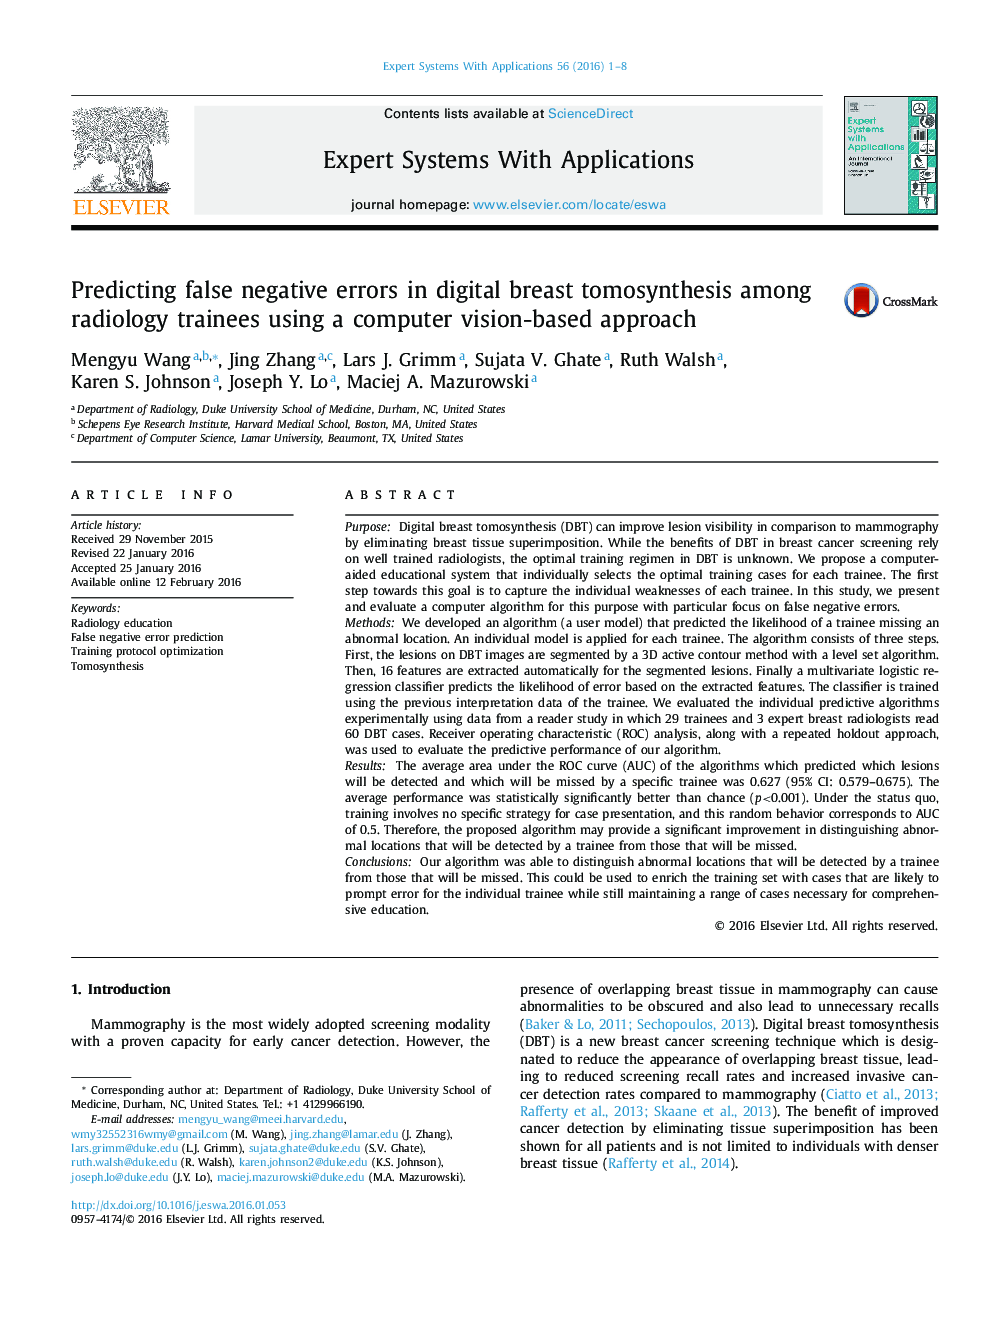 Predicting false negative errors in digital breast tomosynthesis among radiology trainees using a computer vision-based approach